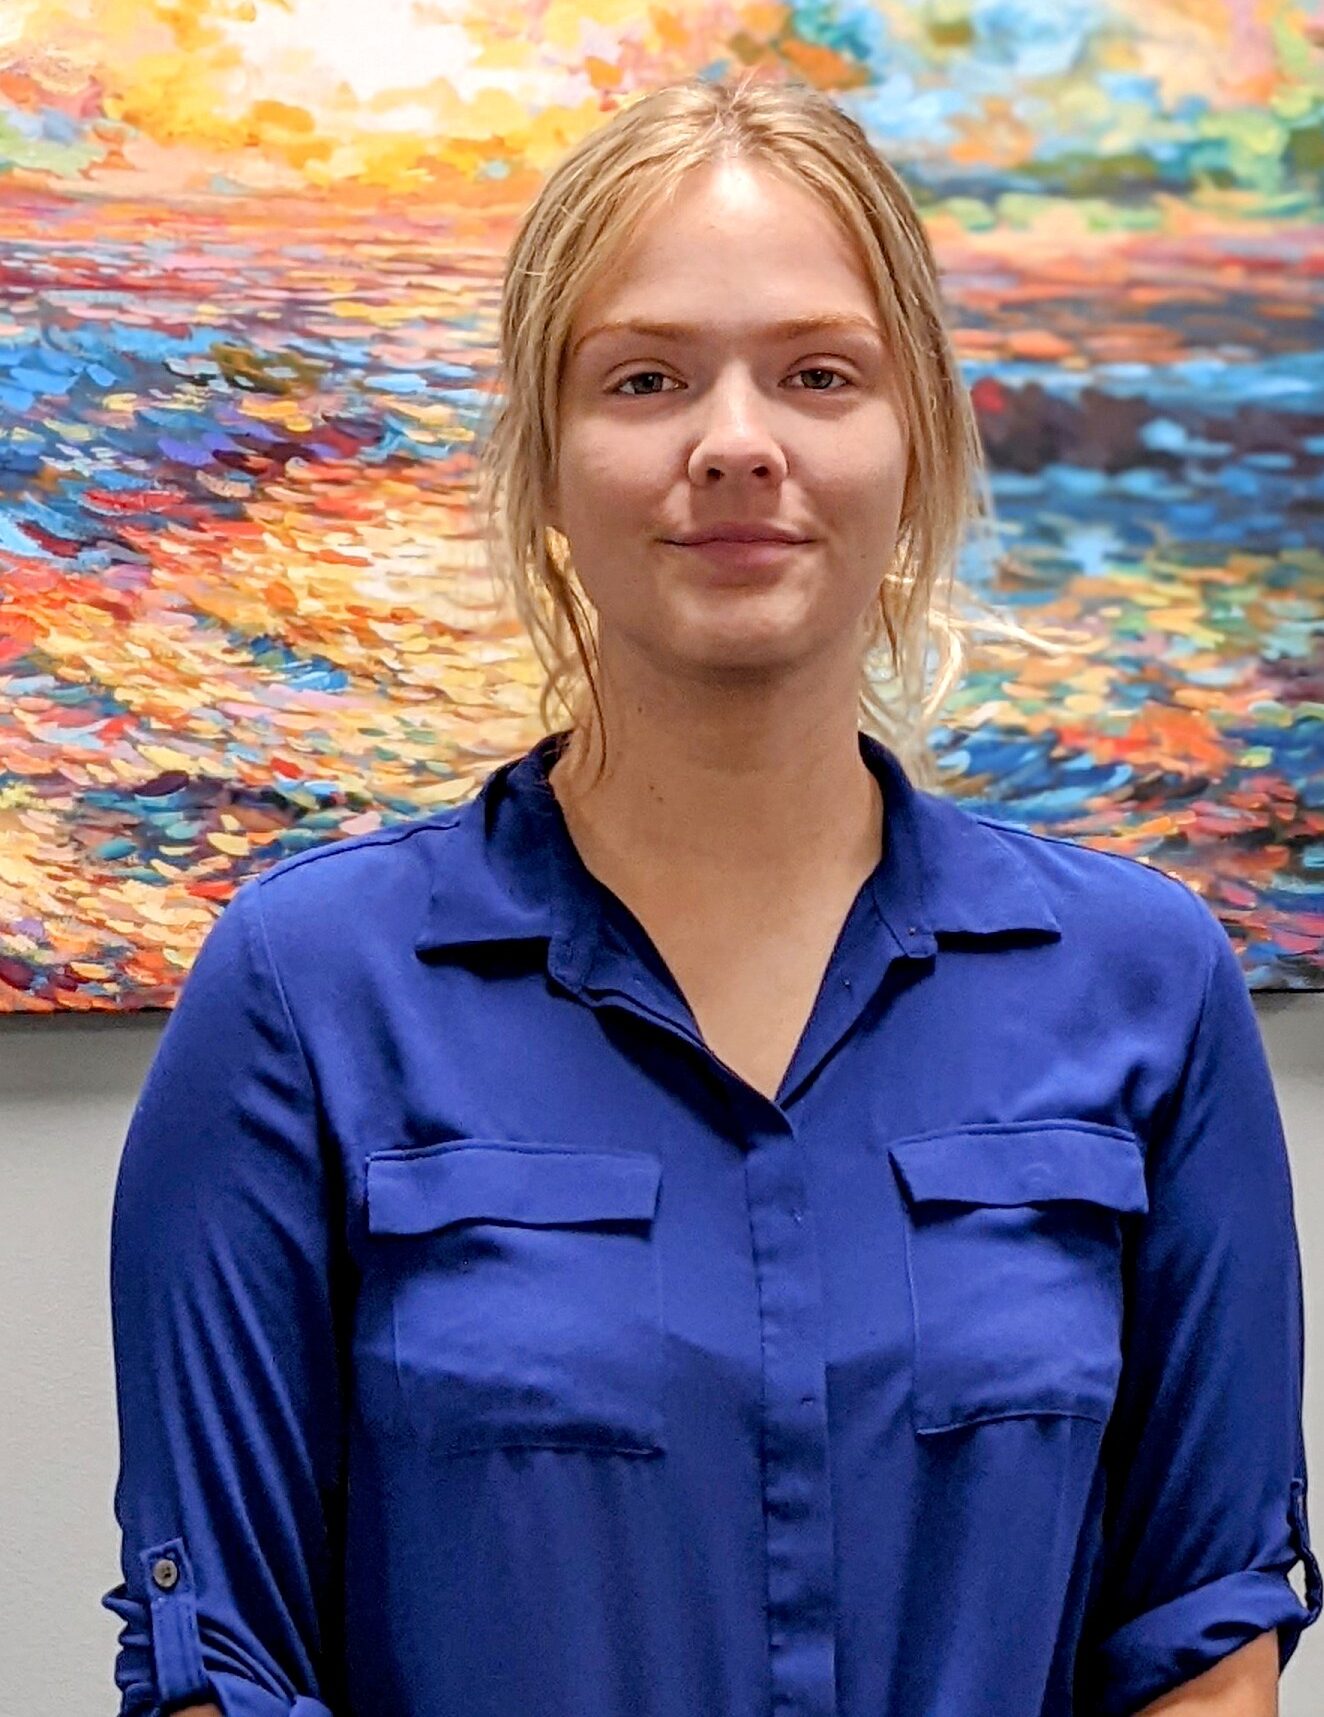 White female with blonde hair wearing a blue button up shirt and standing in front of a colorful abstract painting smiling at t he camera